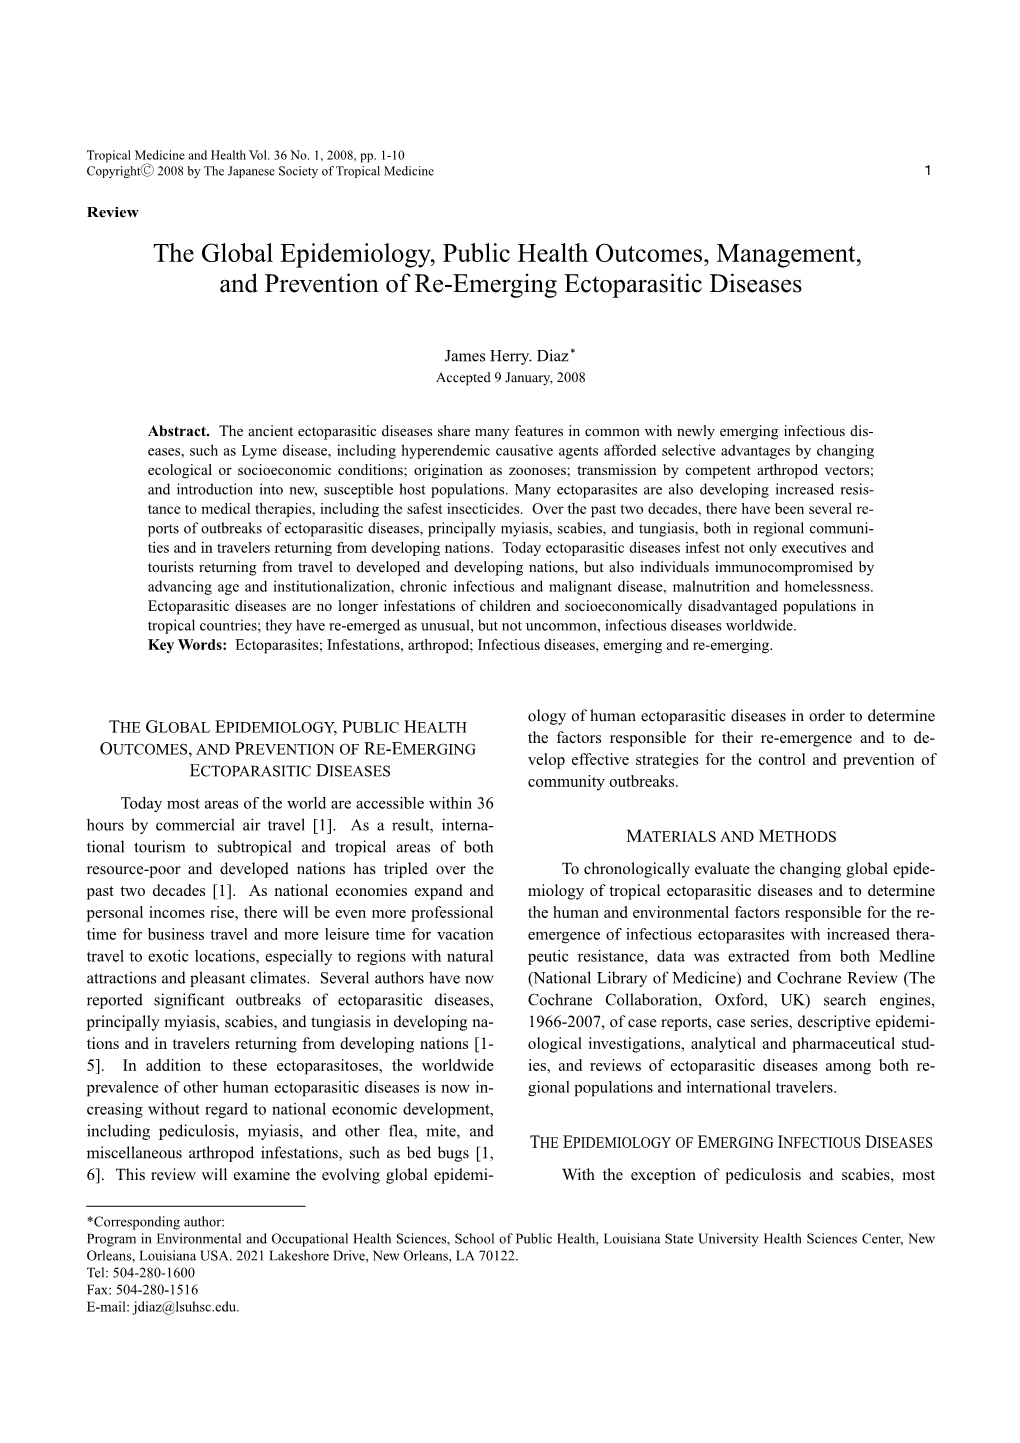 The Global Epidemiology, Public Health Outcomes, Management, and Prevention of Re-Emerging Ectoparasitic Diseases